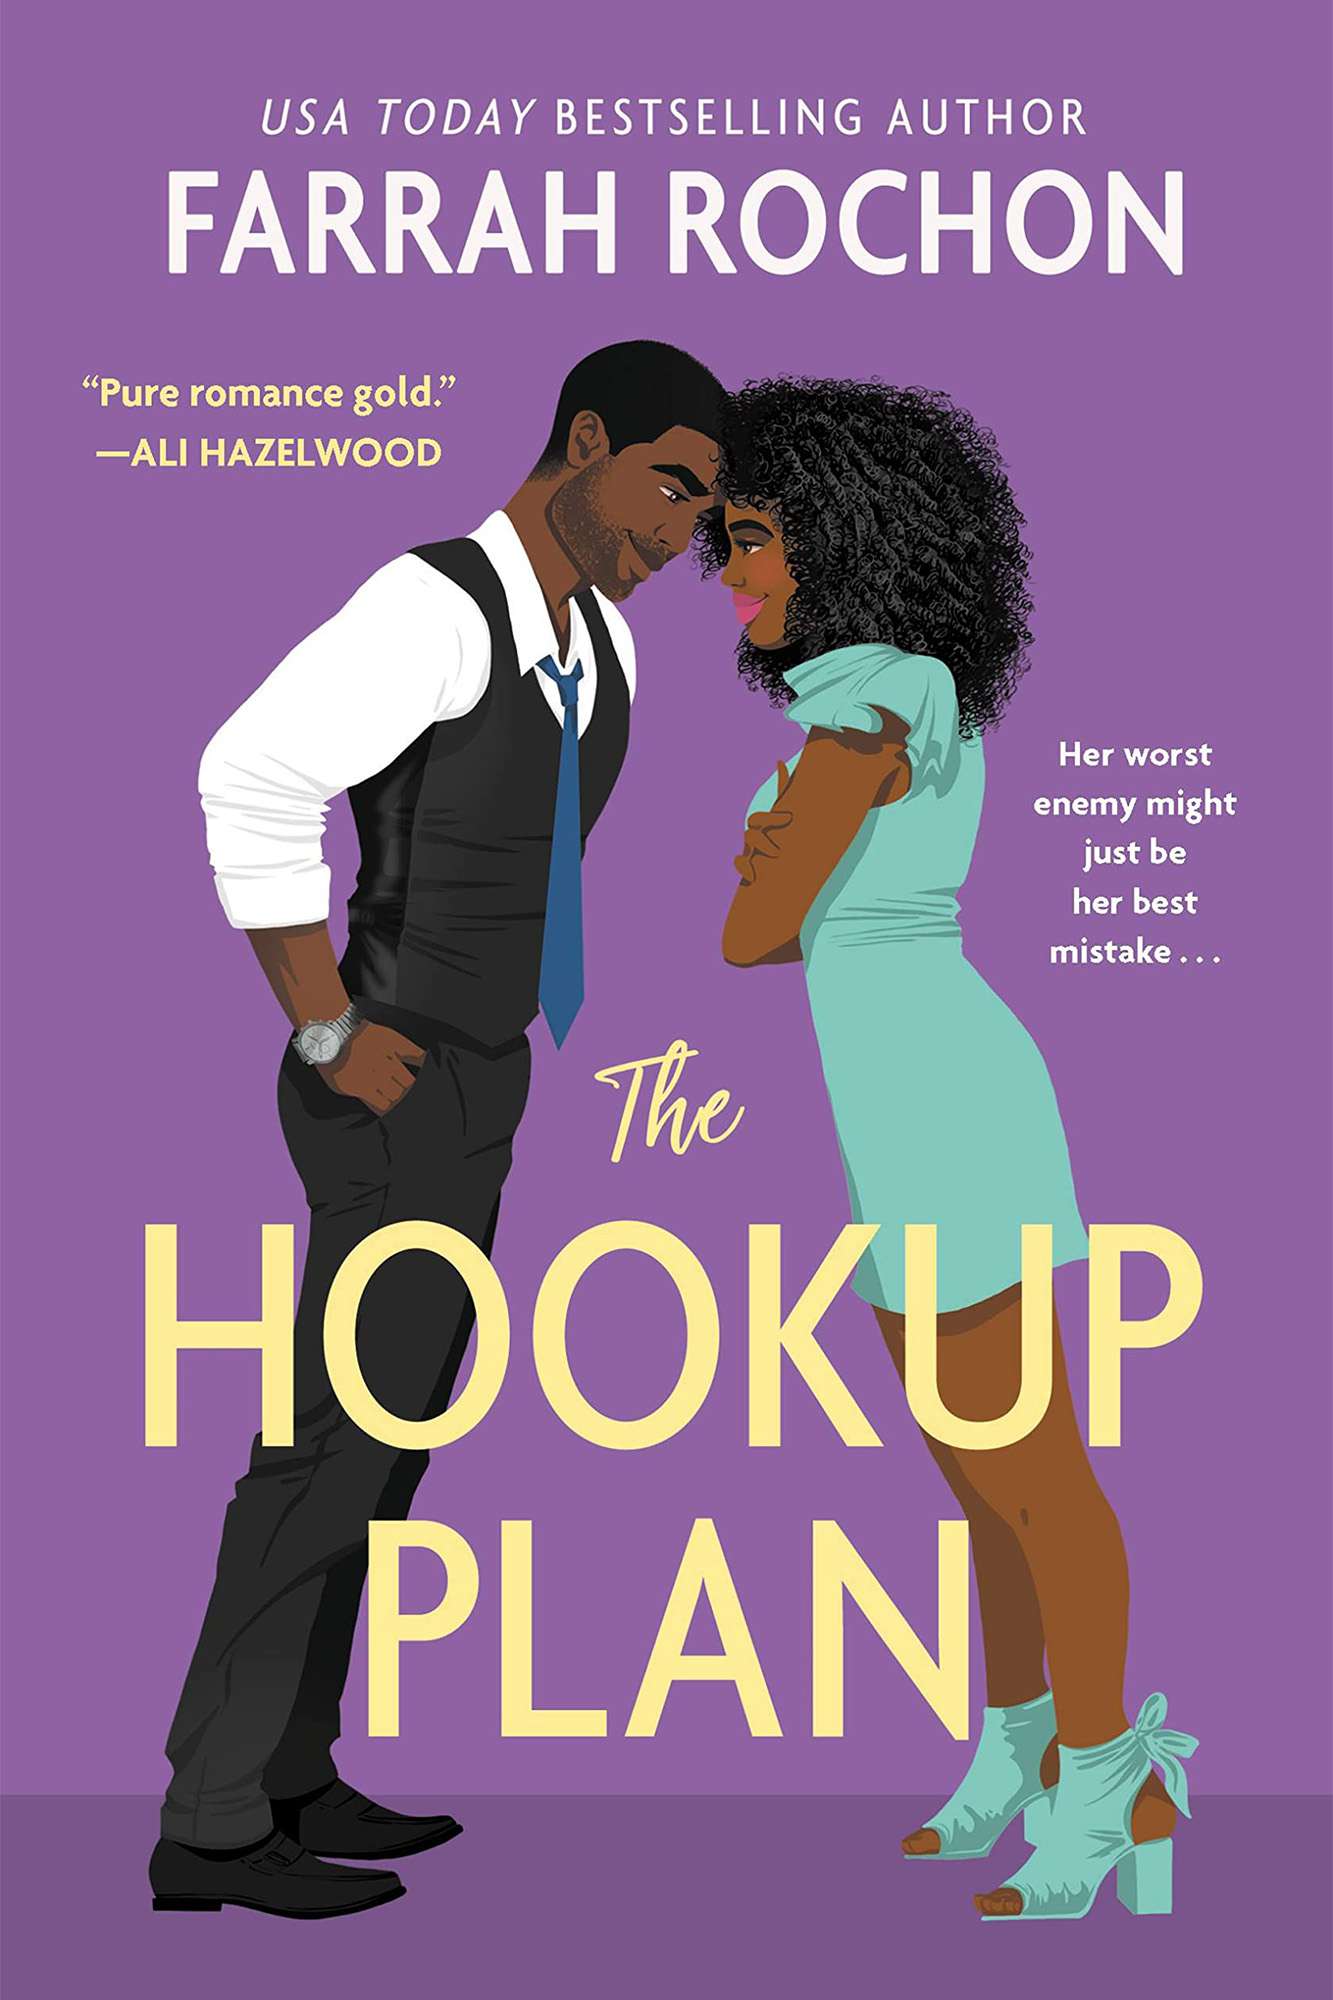 The Hookup Plan Paperback – August 2, 2022by Farrah Rochon